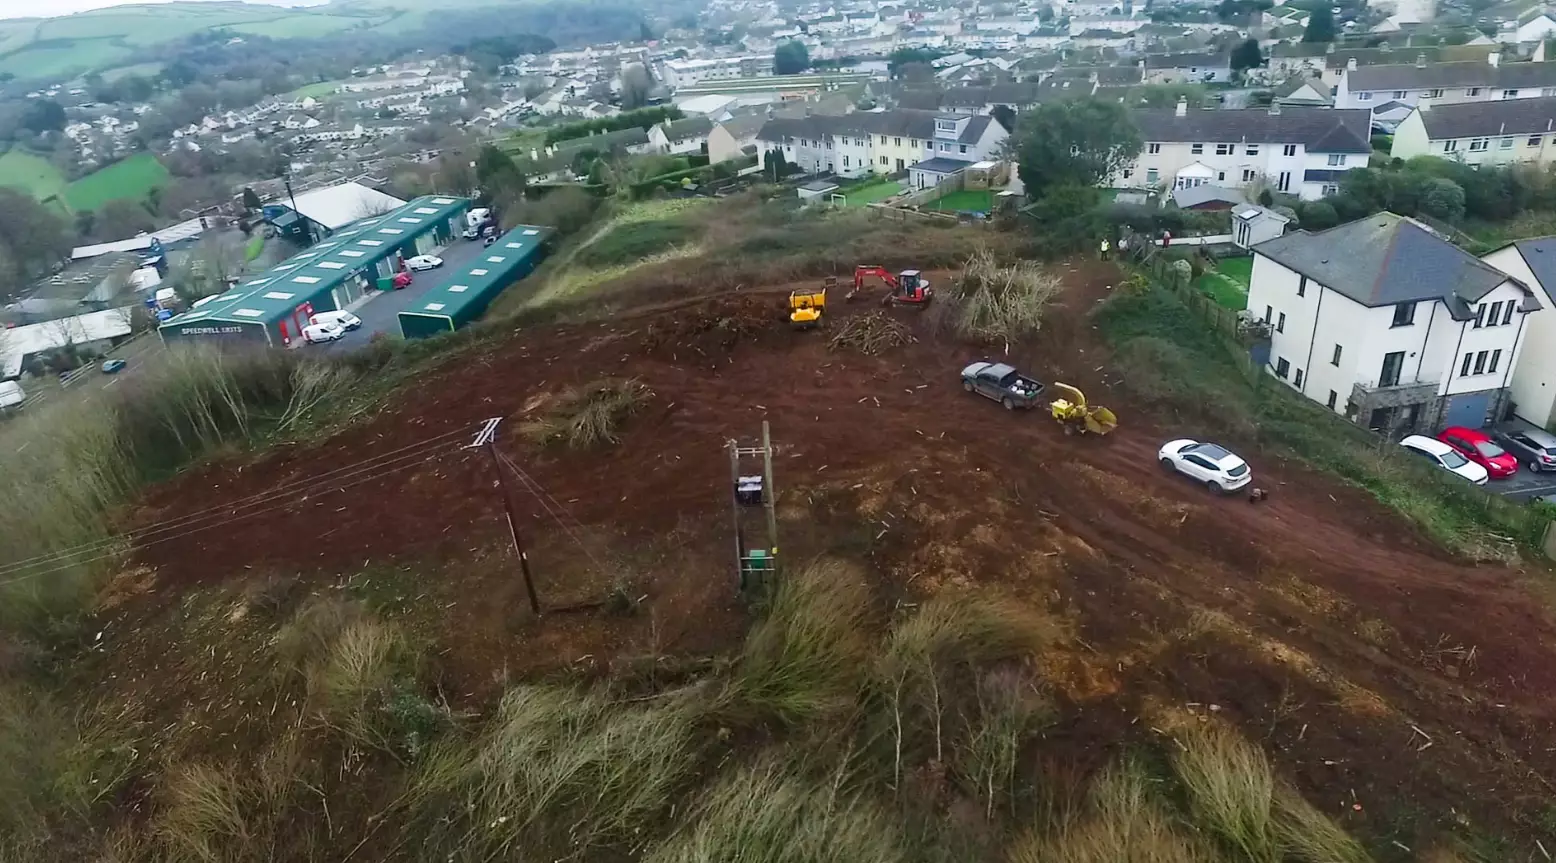 Locals sent a drone up to see if there was any activity on the site.